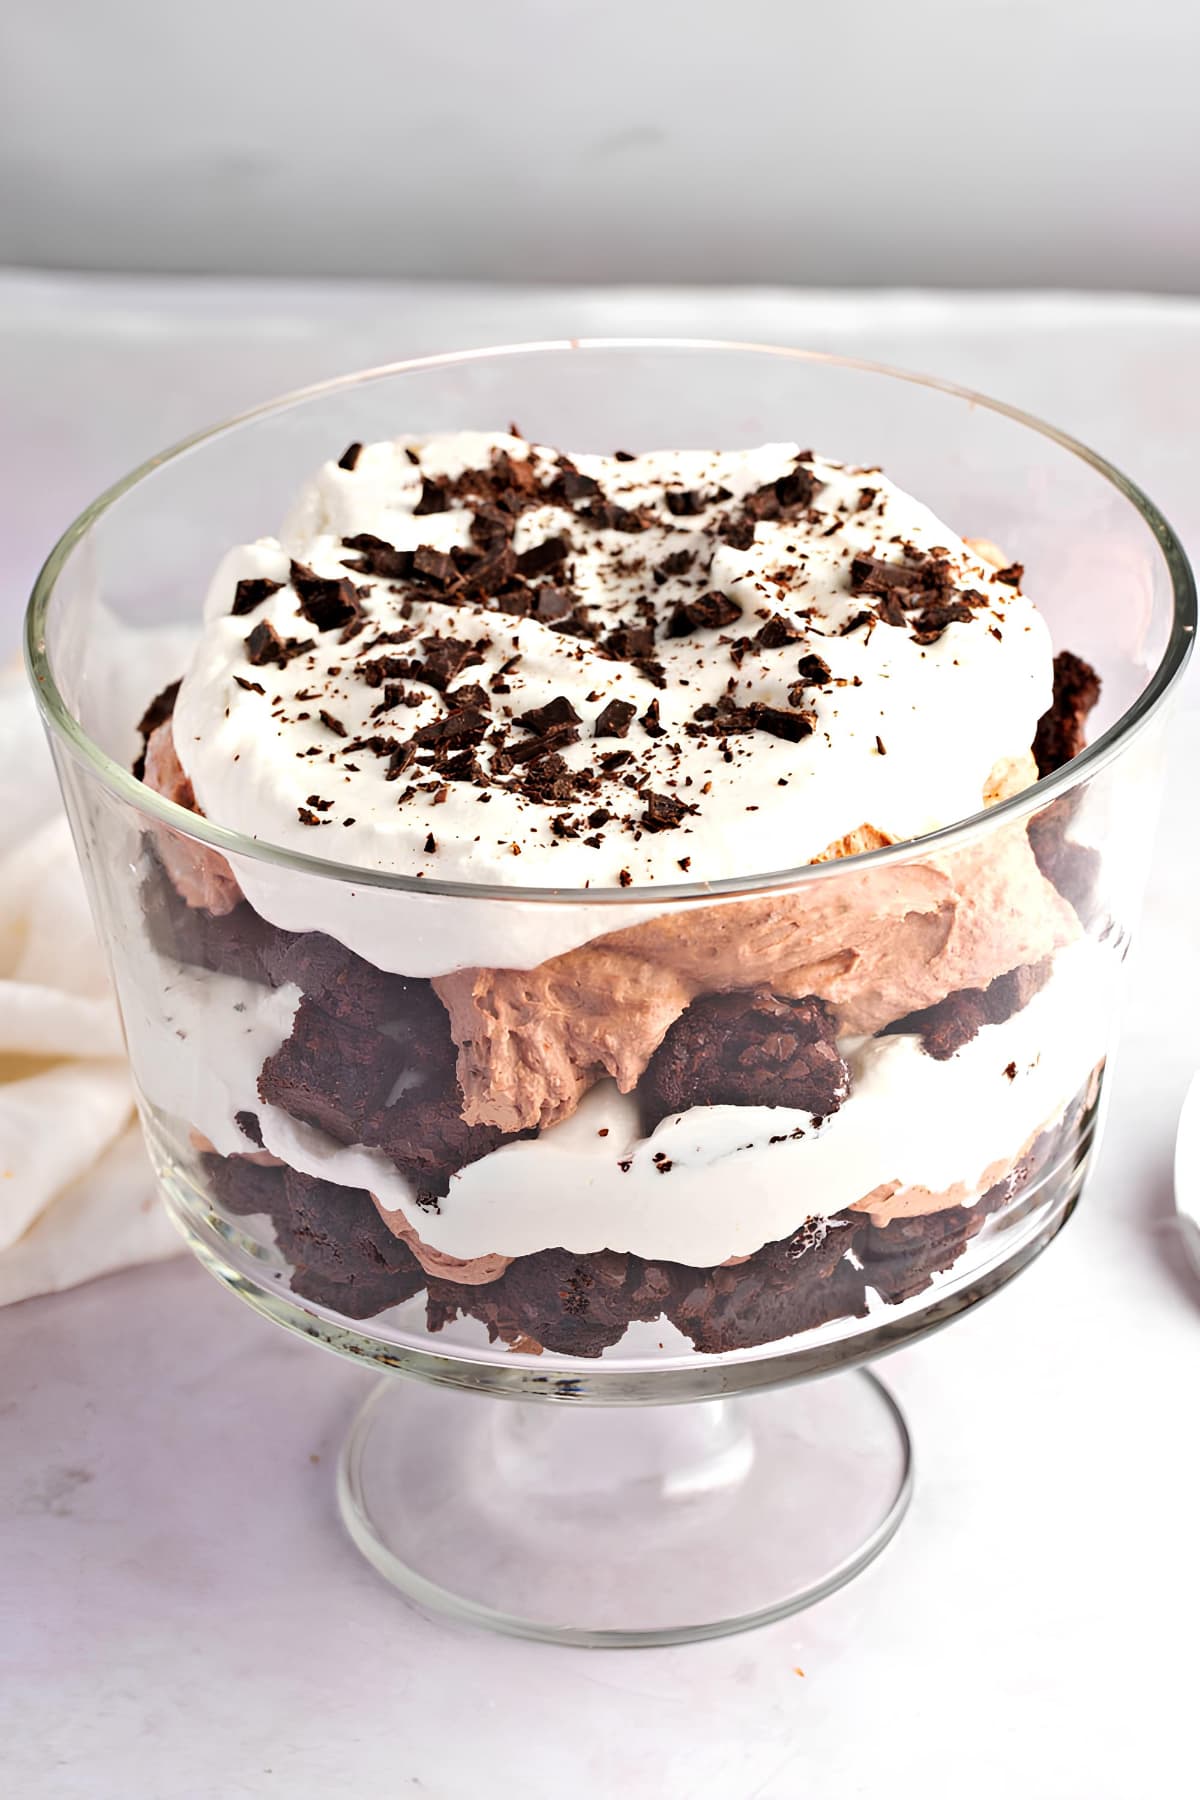 A Glass Bowl of Homemade Chocolate Trifle with Brownies, Whipped Cream and Chocolate Shavings